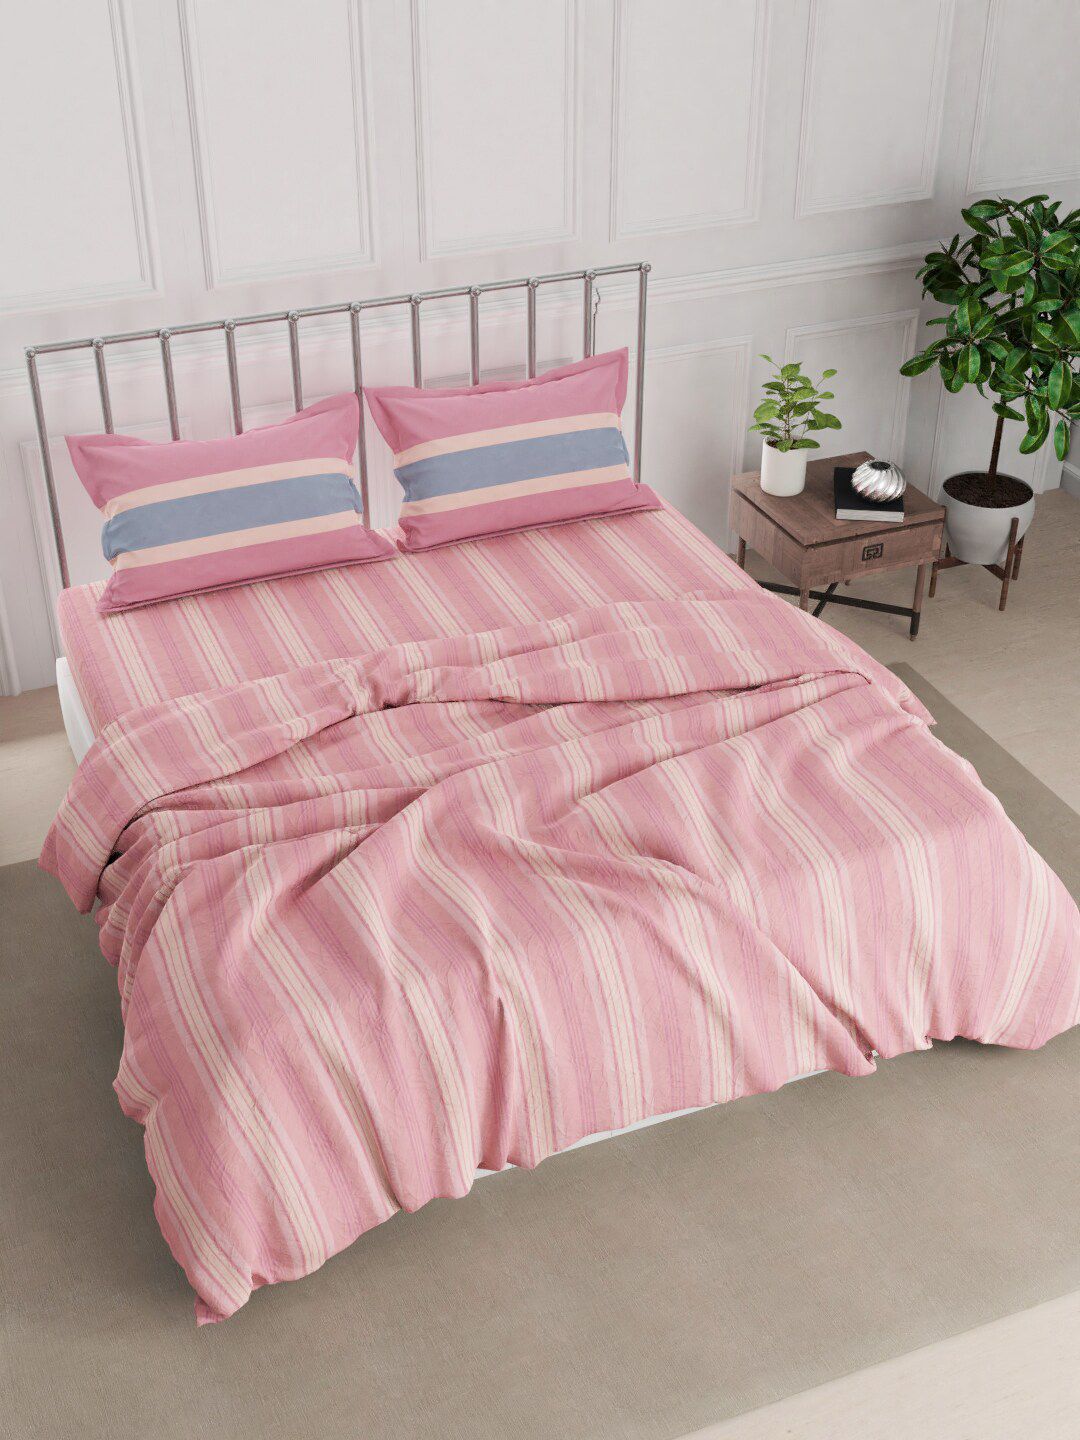 Nautica Peach Coloured Striped Cotton Double King Bedding Set With Comforter Price in India